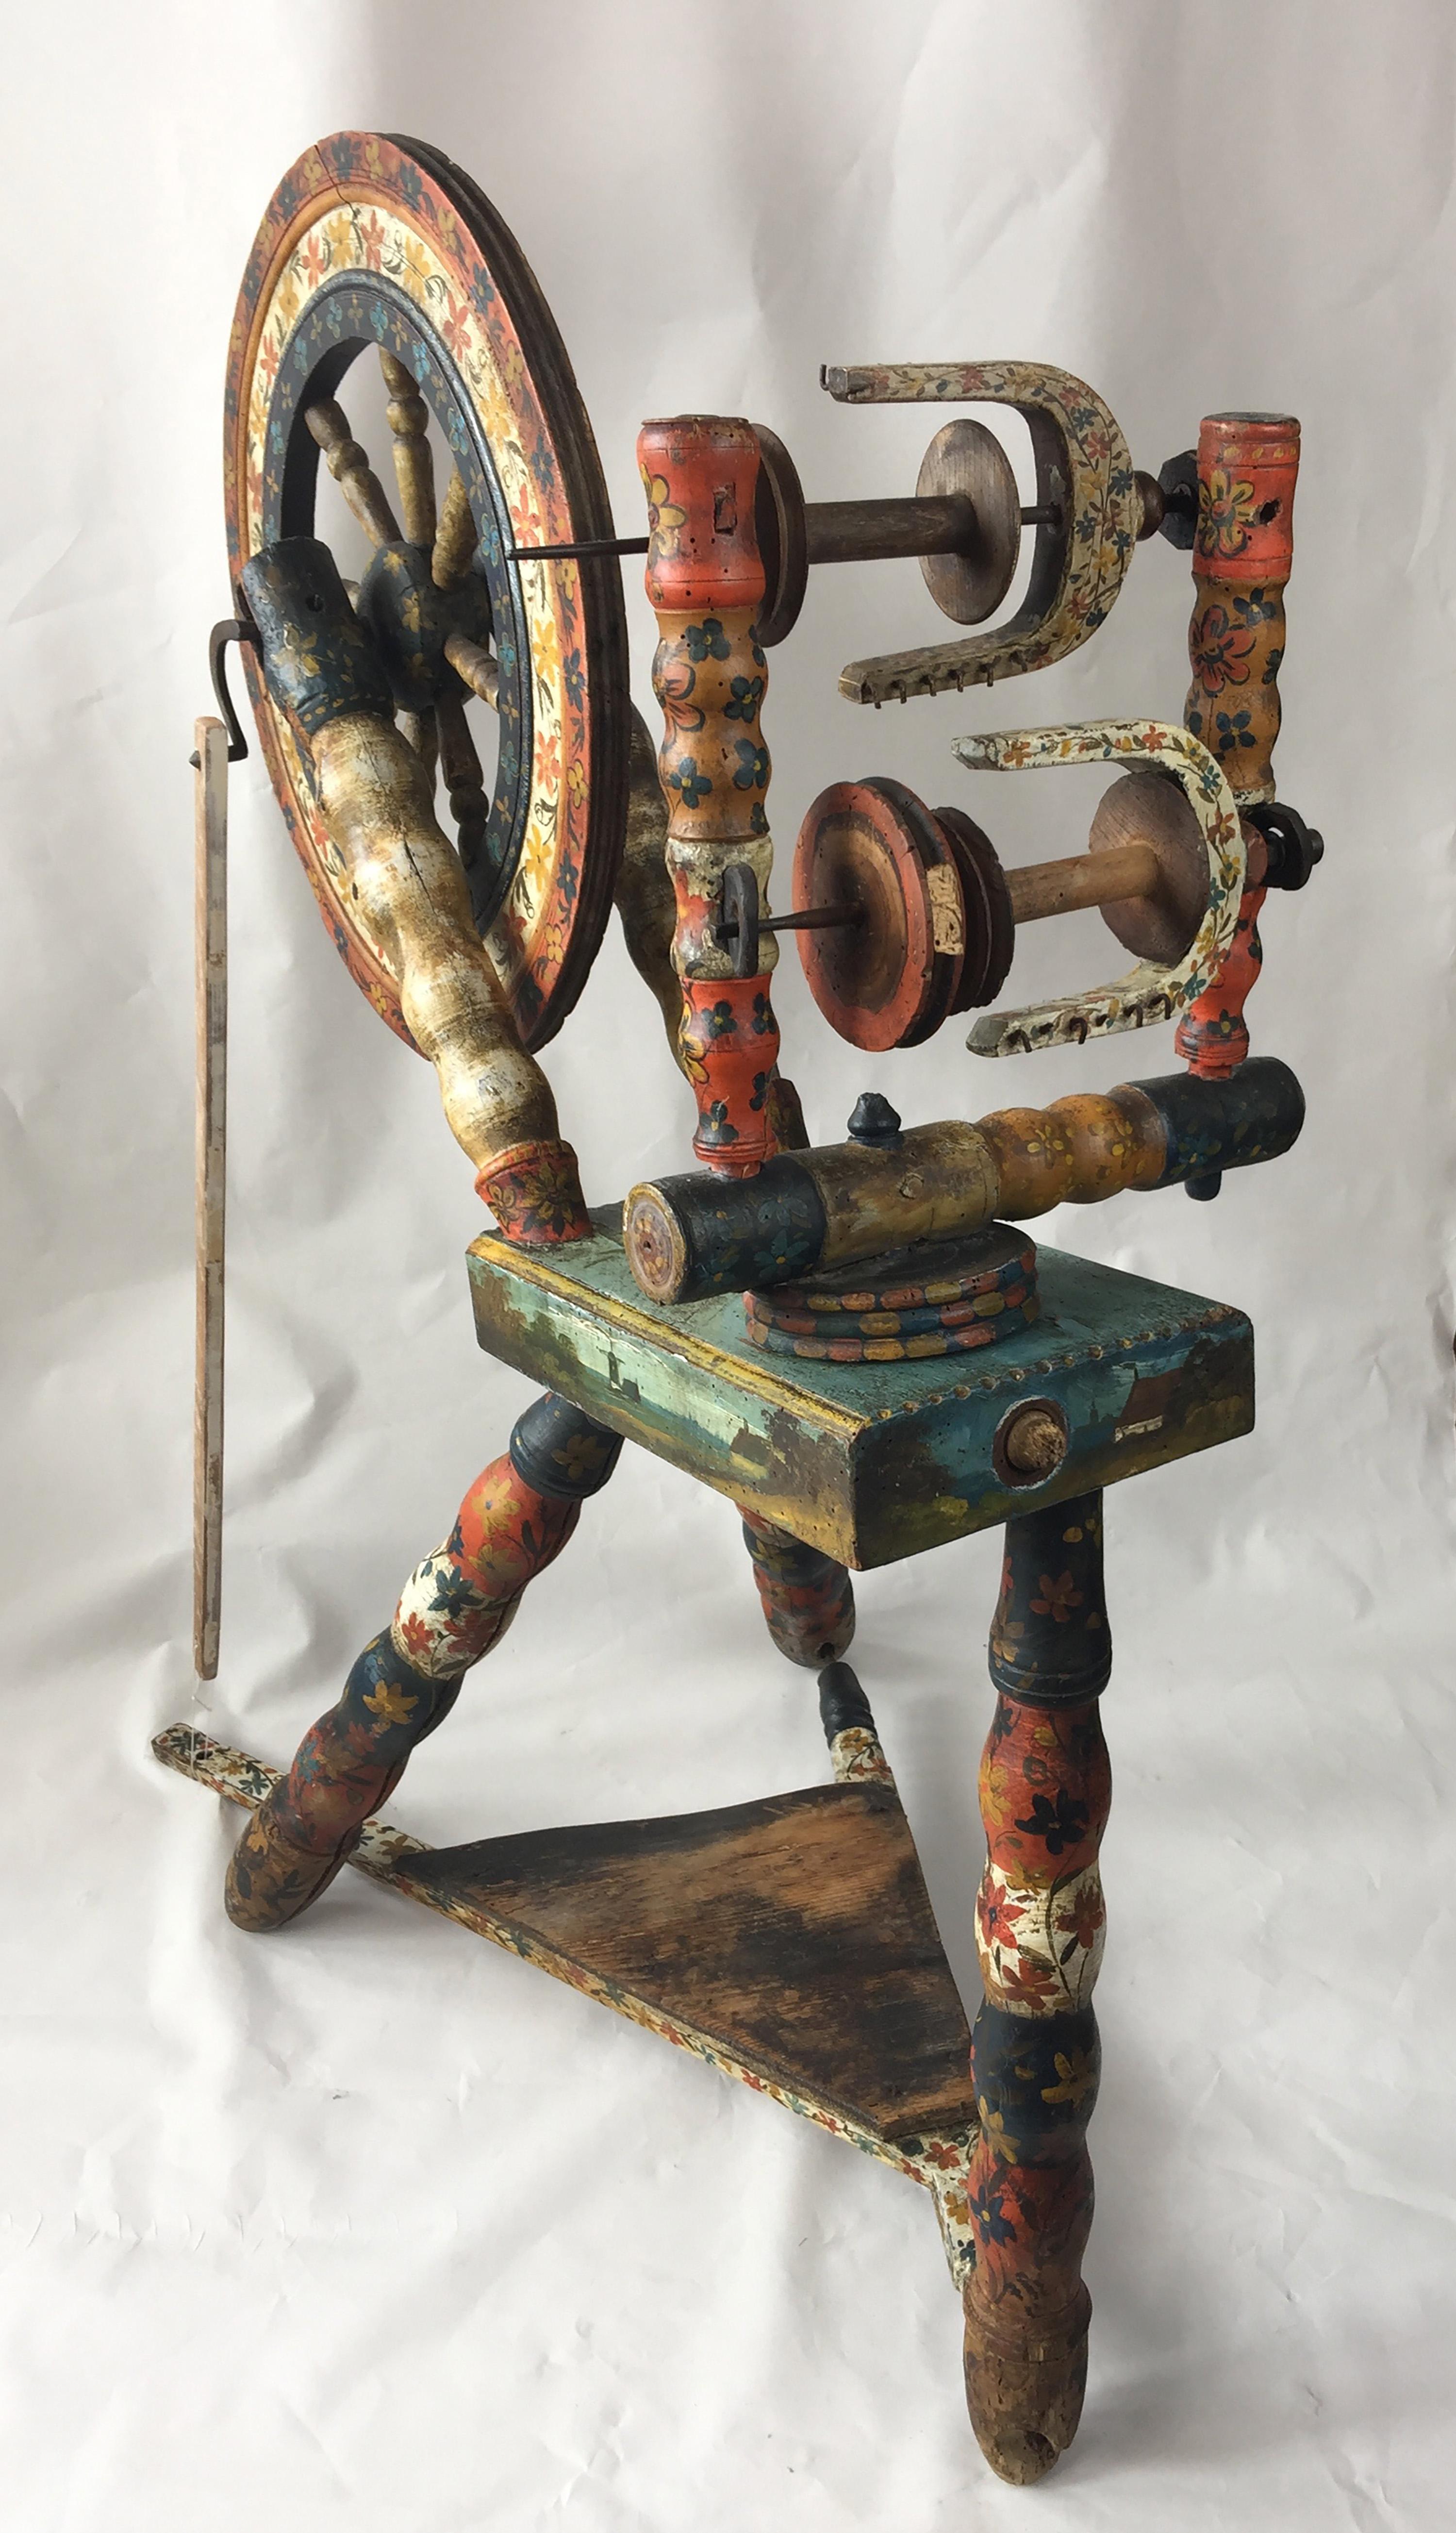 Thought to be 17th or early 18th century Dutch painted and decorated spinning wheel, showing a lot of wear from use. Decorated with scenes of Dutch multi masted sailing ships bearing the Dutch flag on one side and Windmills on the reverse. The Dutch